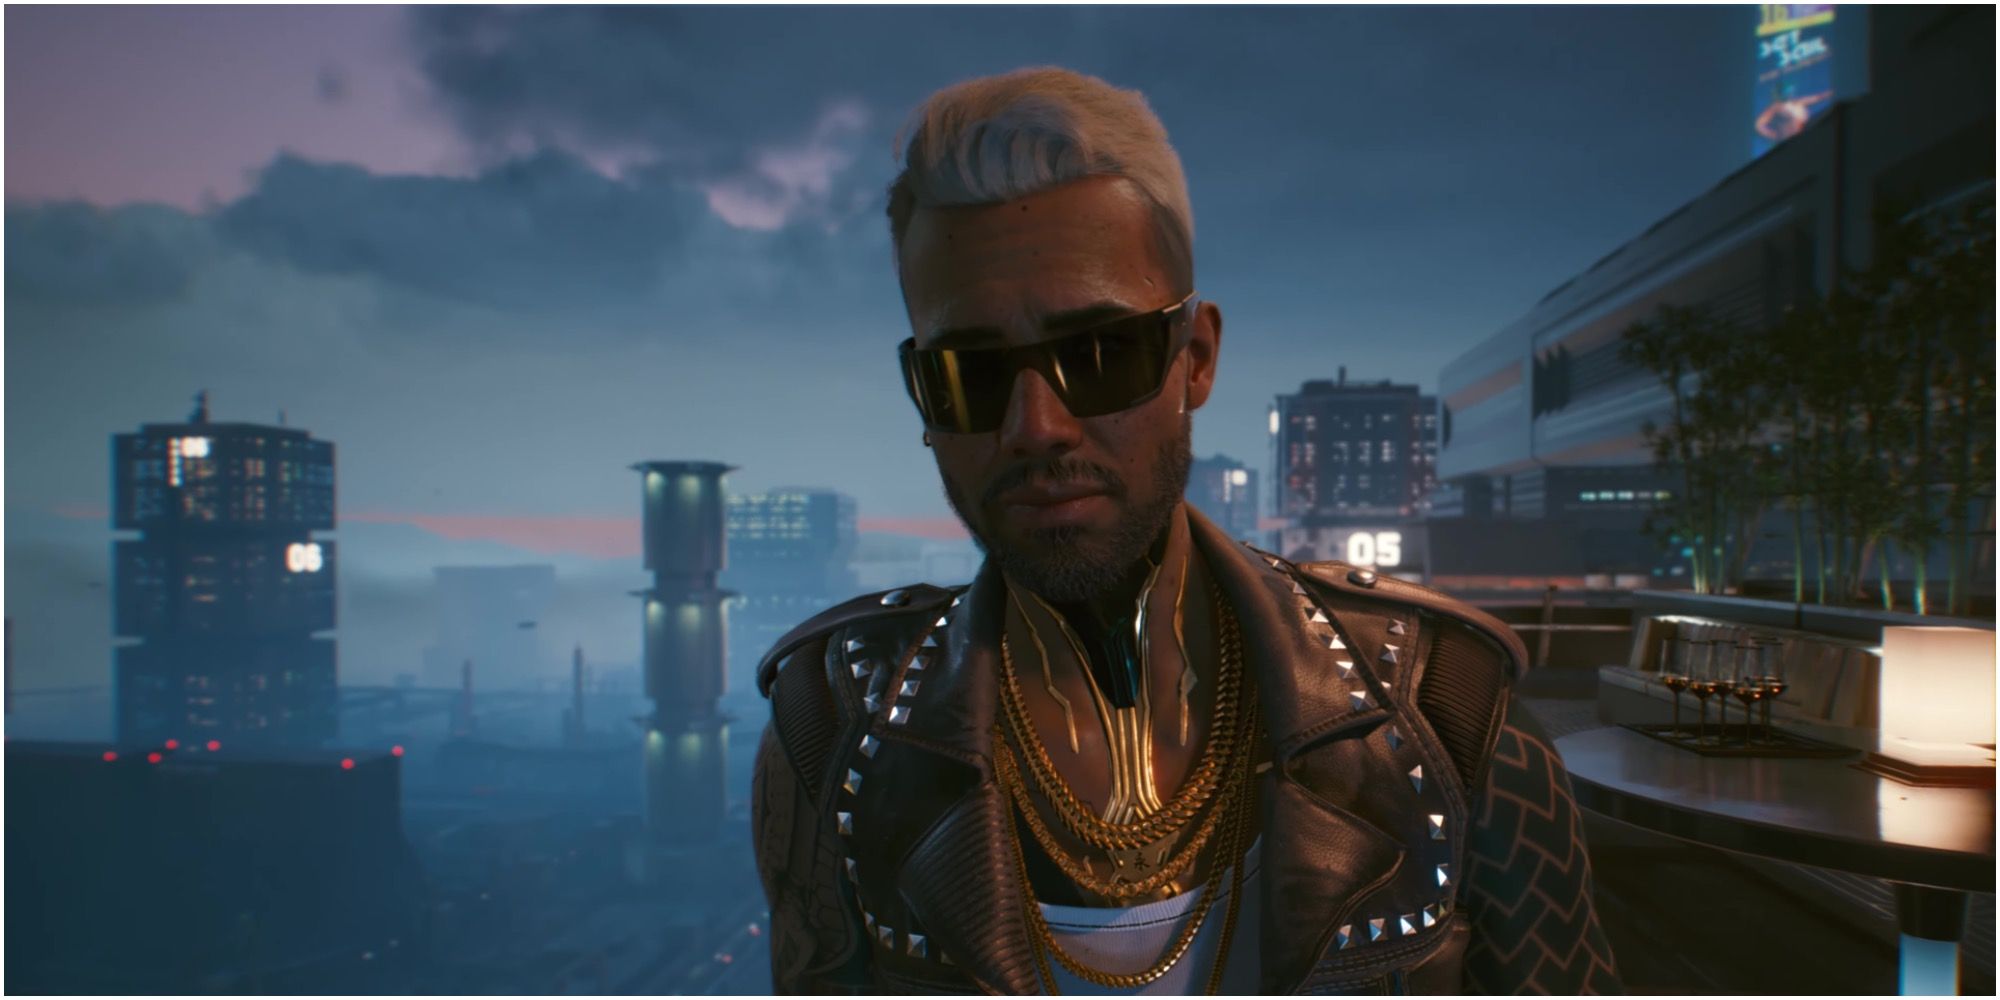 Kerry on the roof cyberpunk 2077